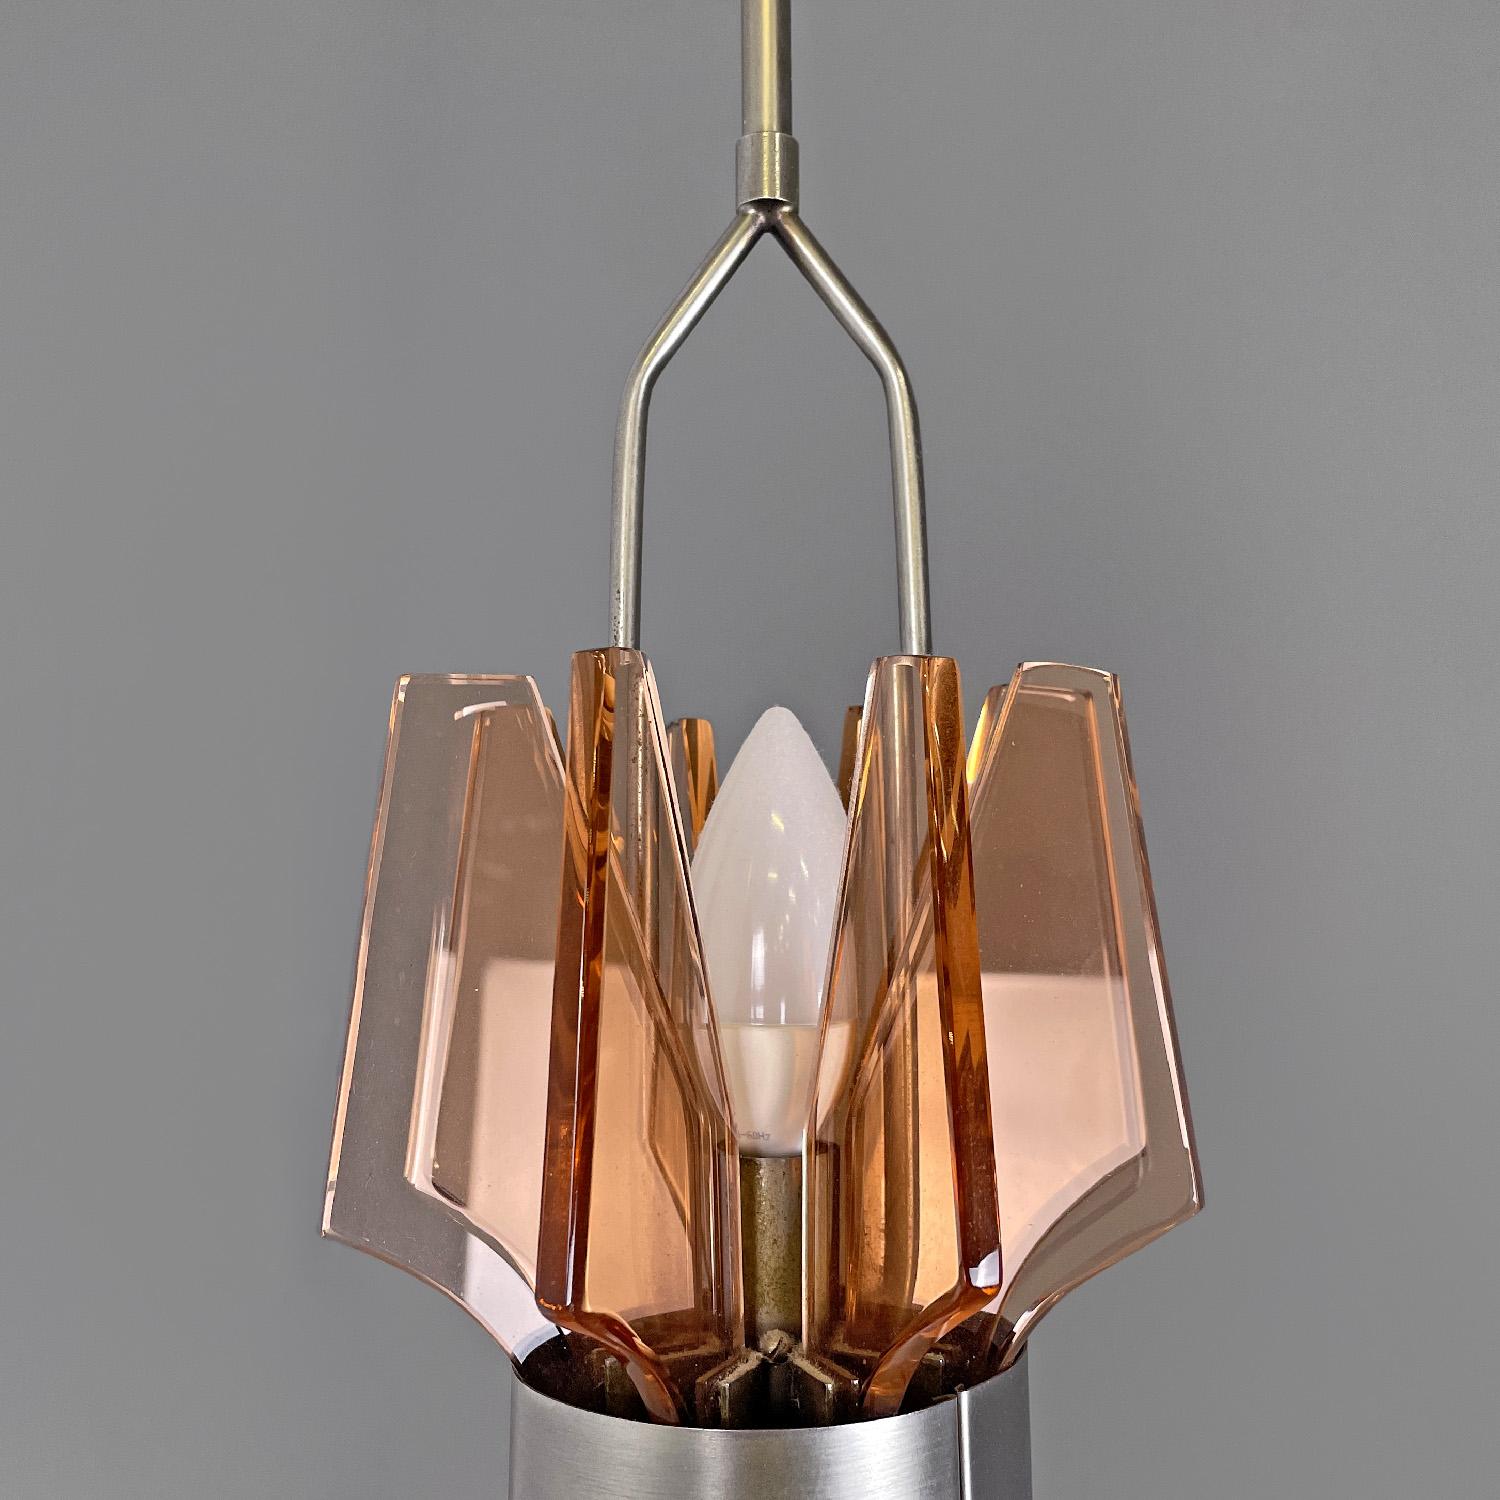 Italian mid-century modern chandelier in peach pink glass and metal, 1960s For Sale 3